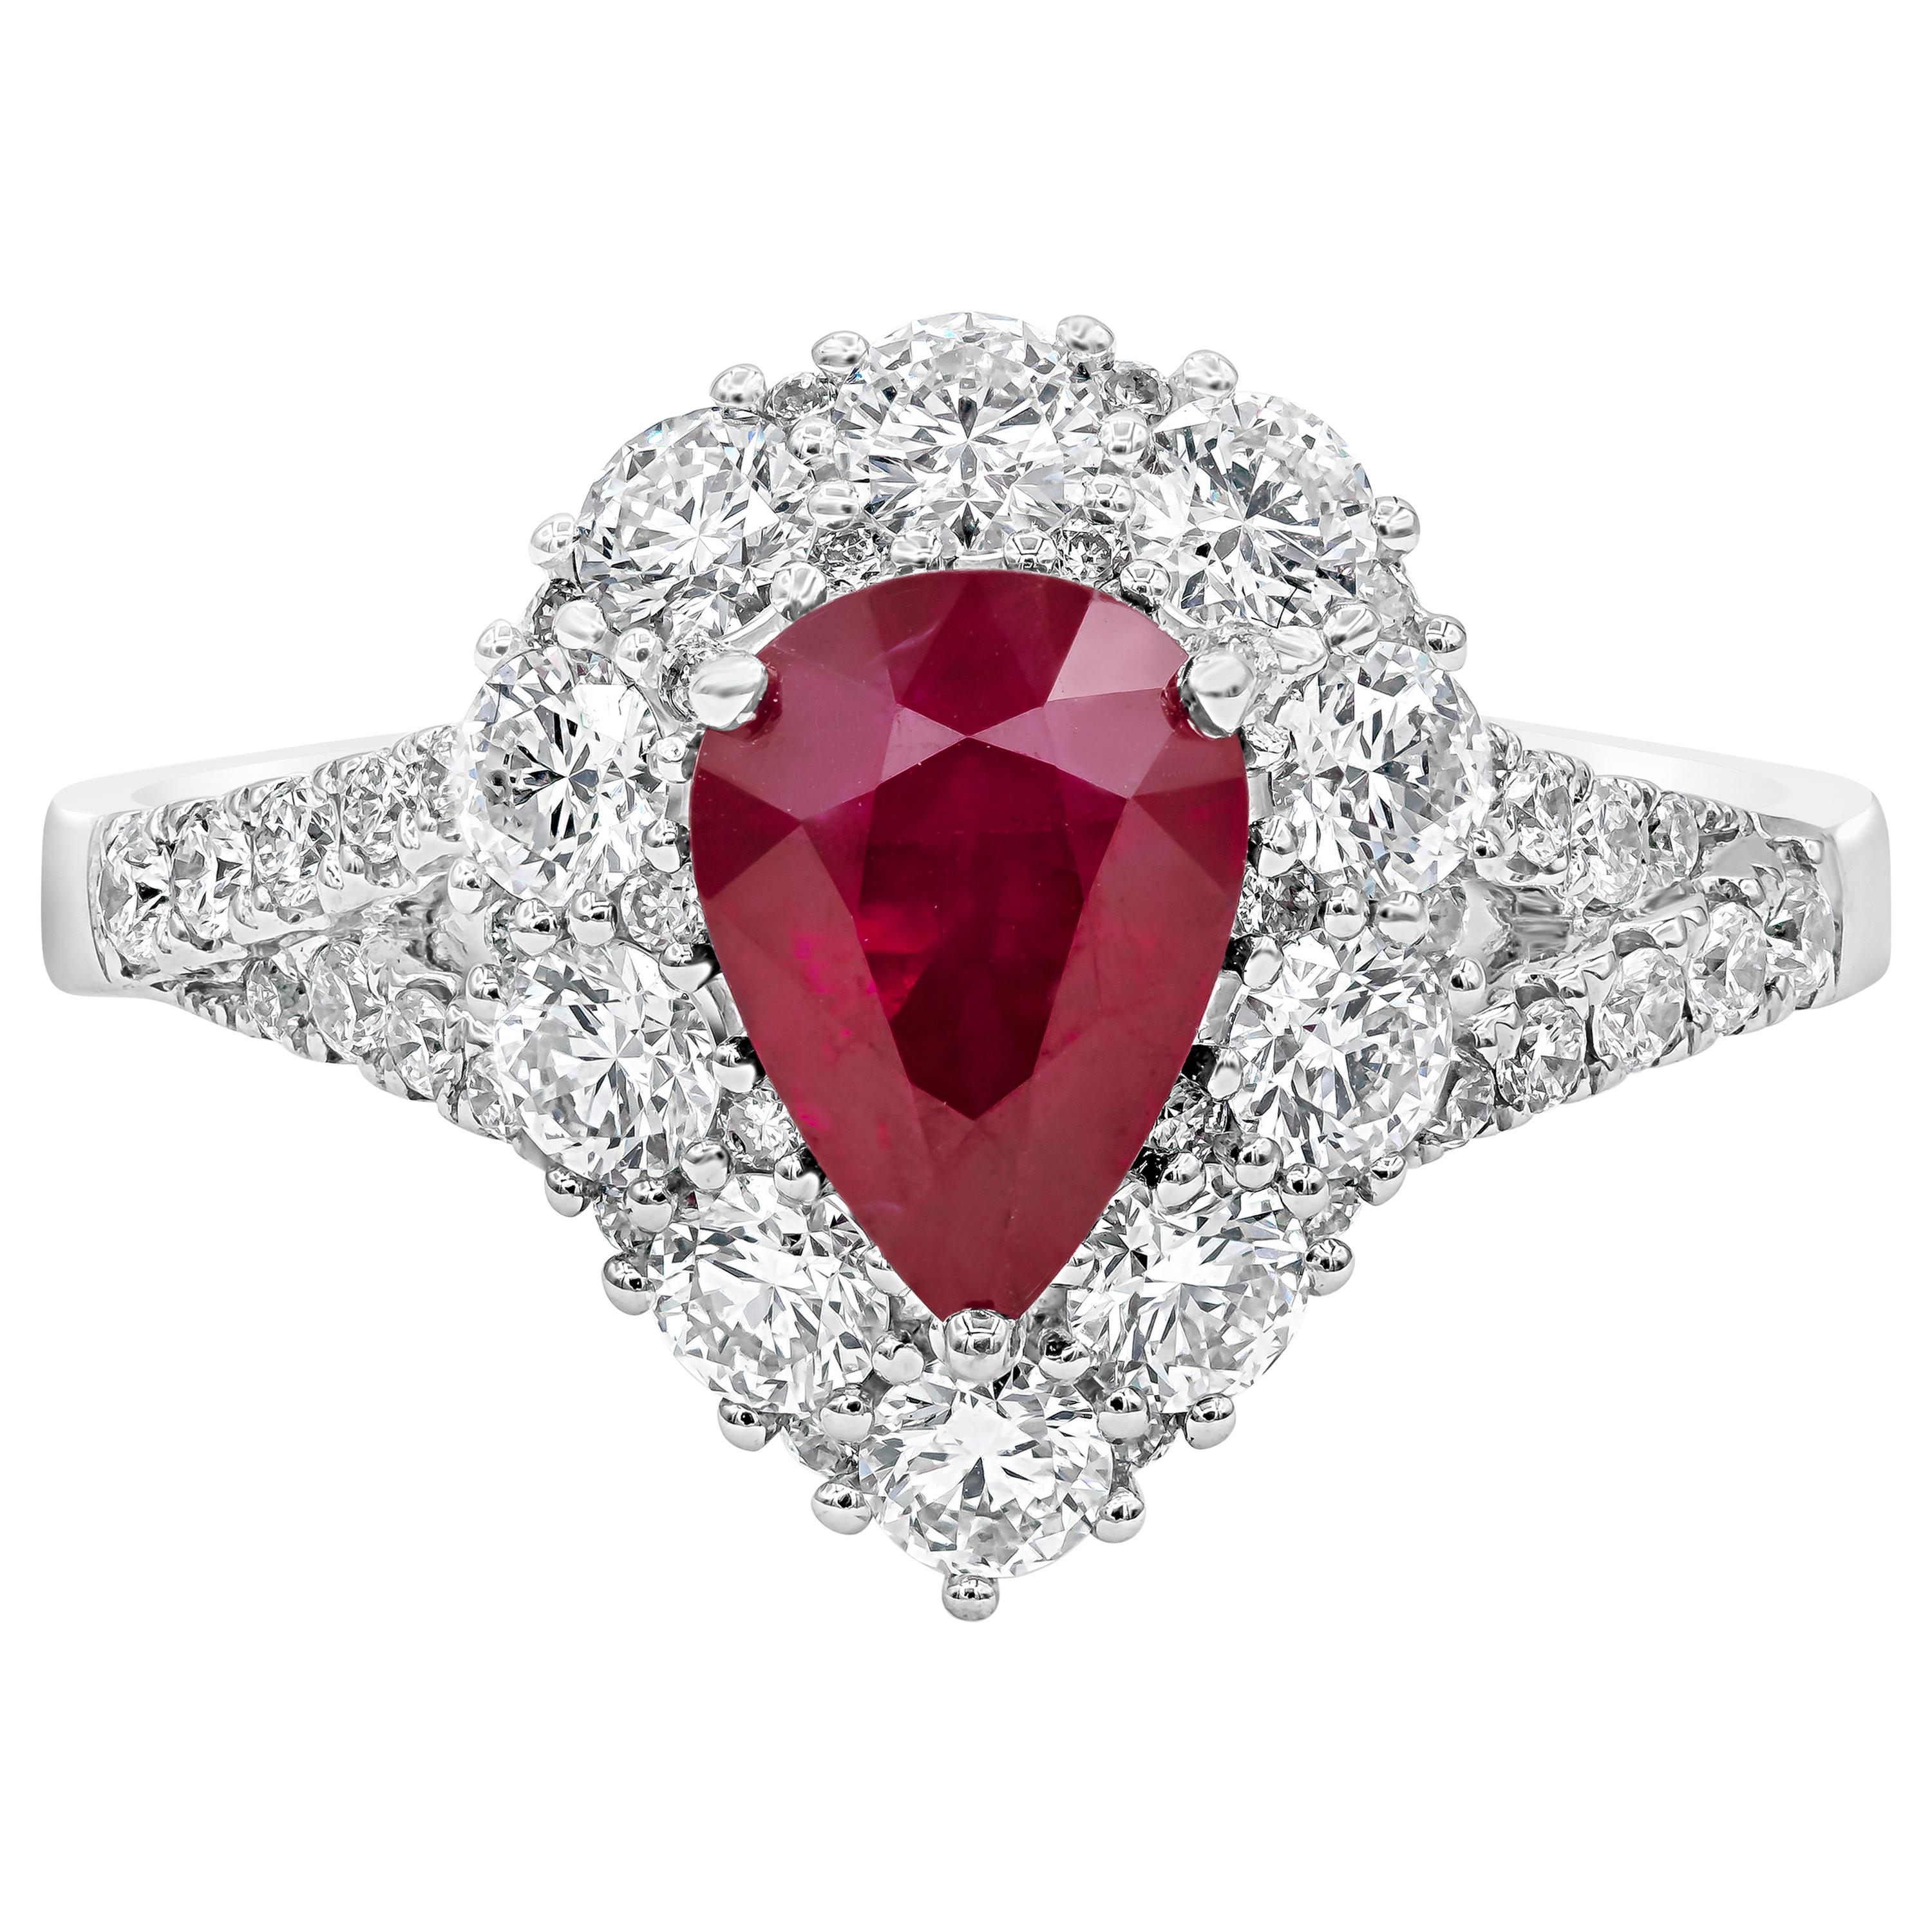 Roman Malakov 1.33 Carats Pear Shape Ruby with Diamond Halo Engagement Ring For Sale